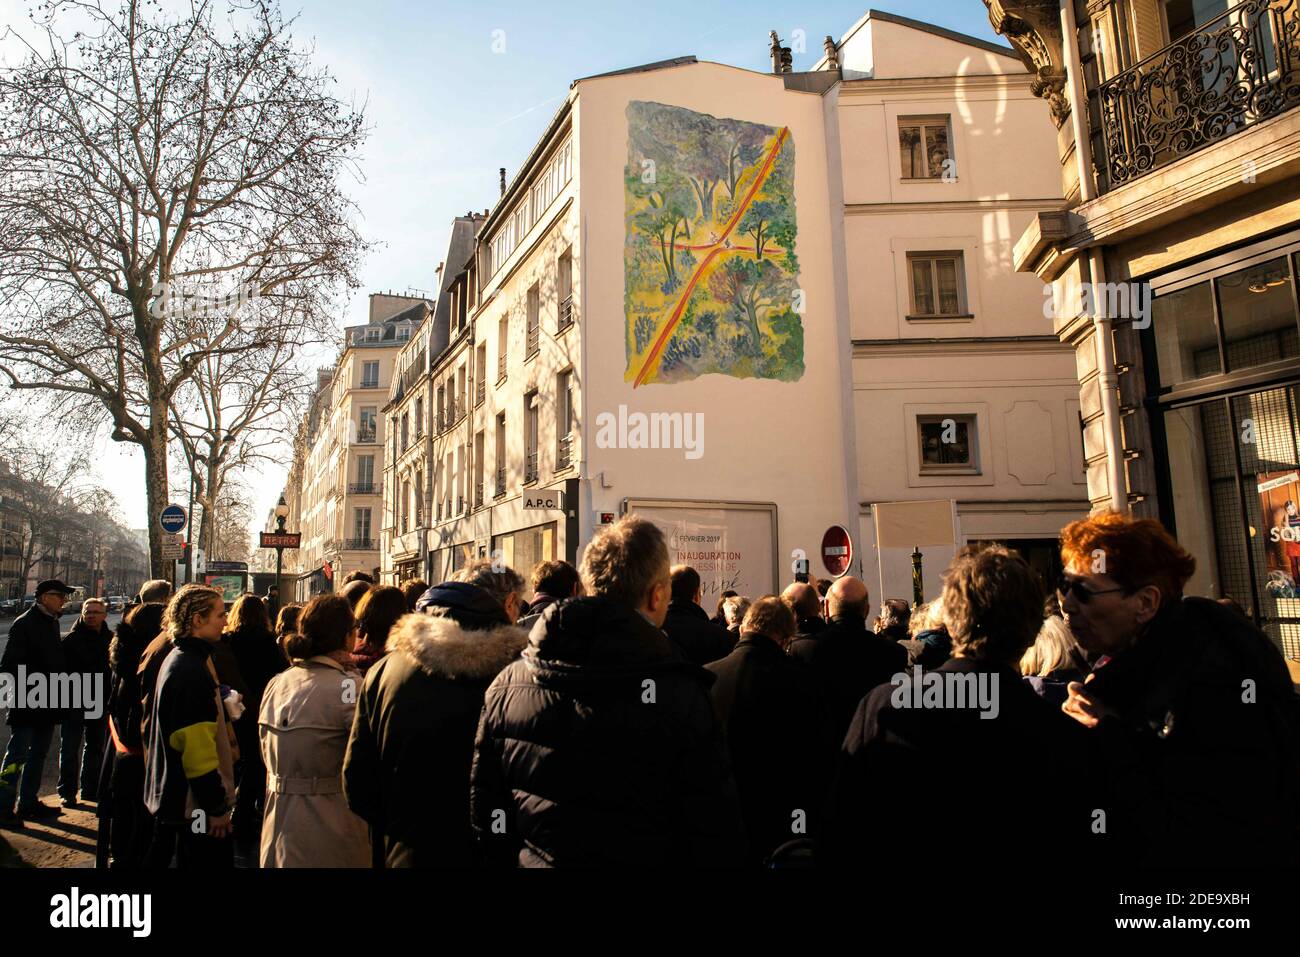 A wall fresco from a artwork of artist Jean-Jacques Sempe is seen at the crossing of Boulevard des Filles du Calvaire and Rue Froissard, 3rd District of Paris, France, Febuary 16, 2019. Photo by Denis Prezat/Avenir Pictures/ABACAPRESS.COM Stock Photo